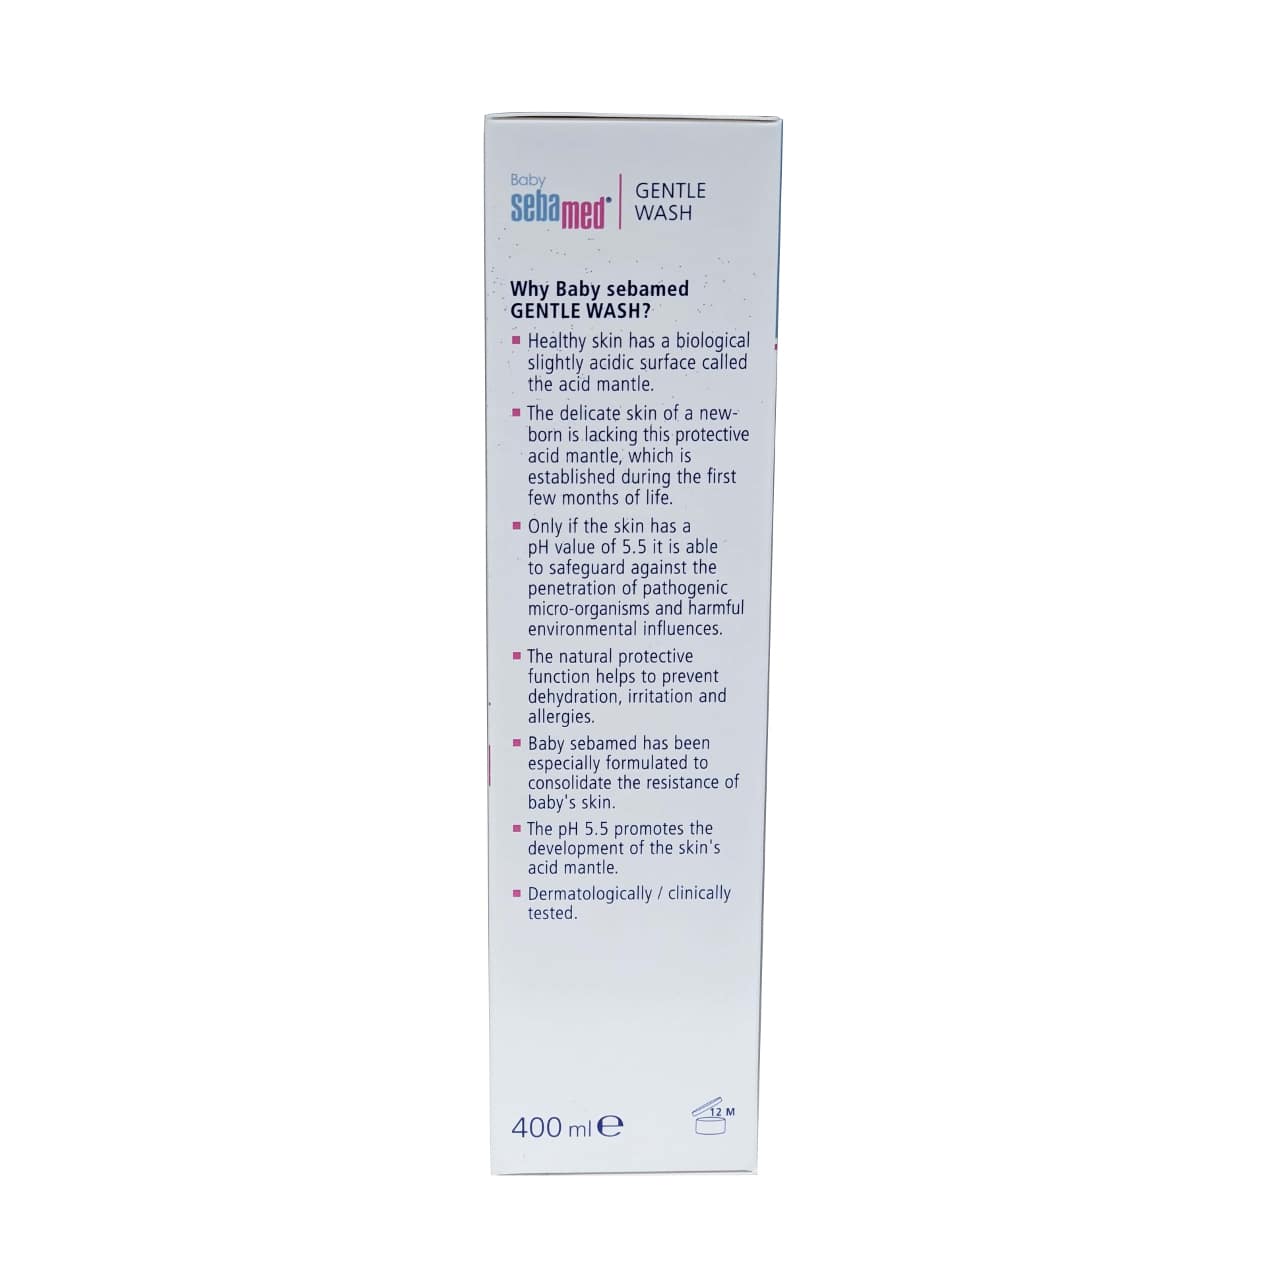 Product details for Baby Sebamed Gentle Wash for Delicate Skin with Allantoin 400 mL in French